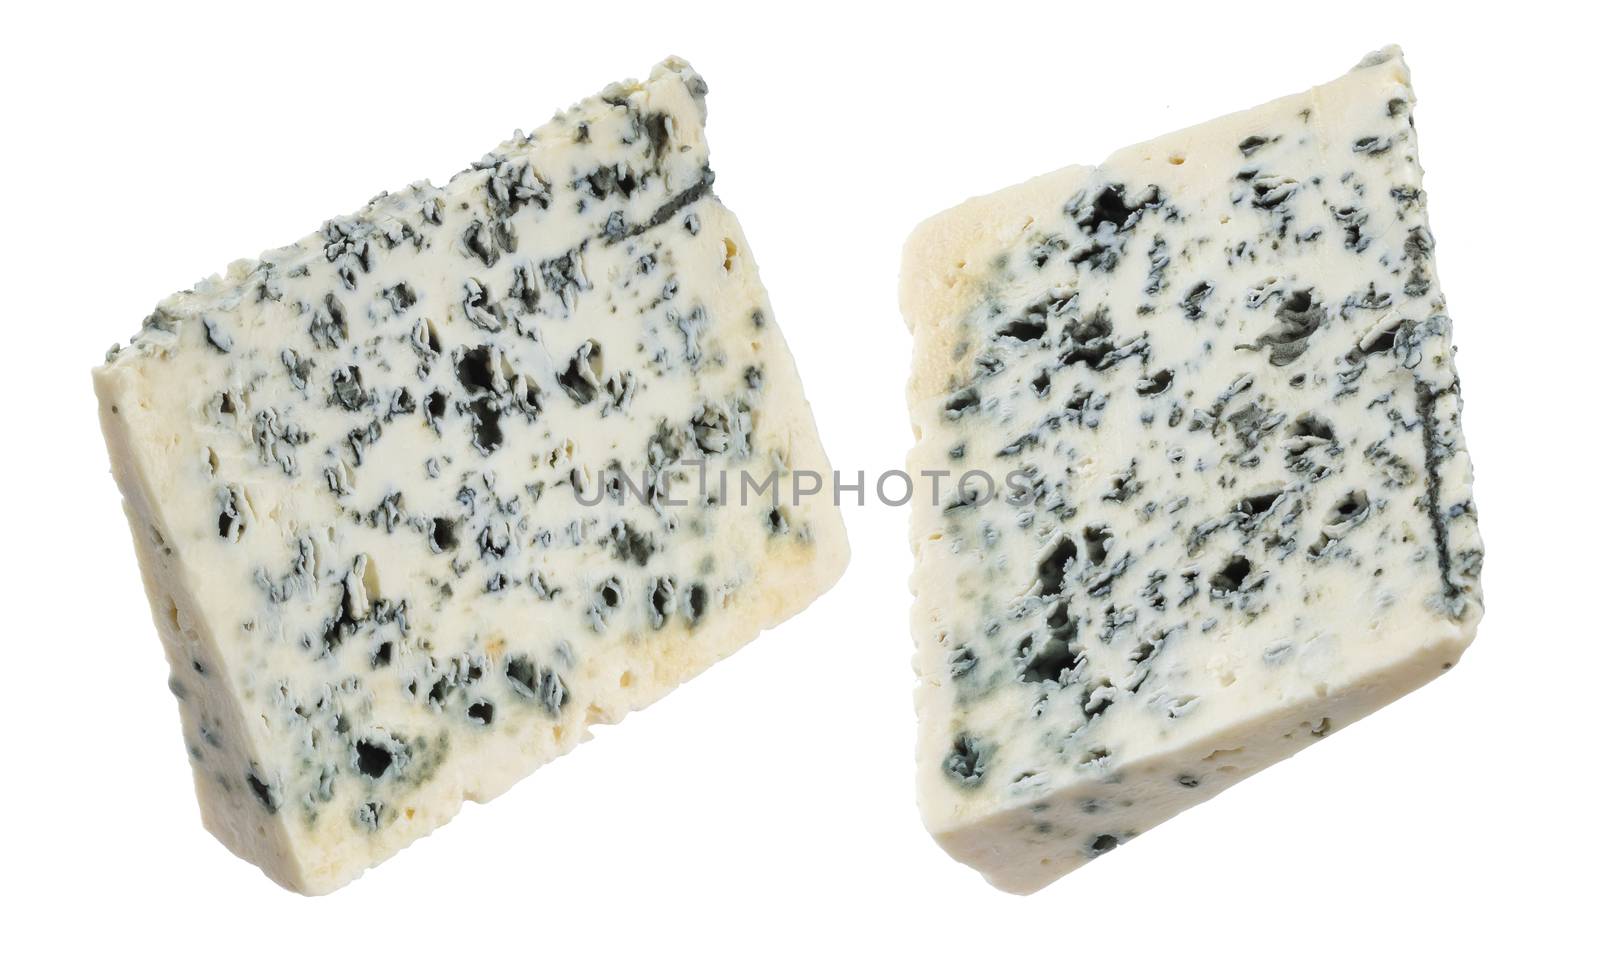 Danish blue cheese isolated on white background with clipping path.